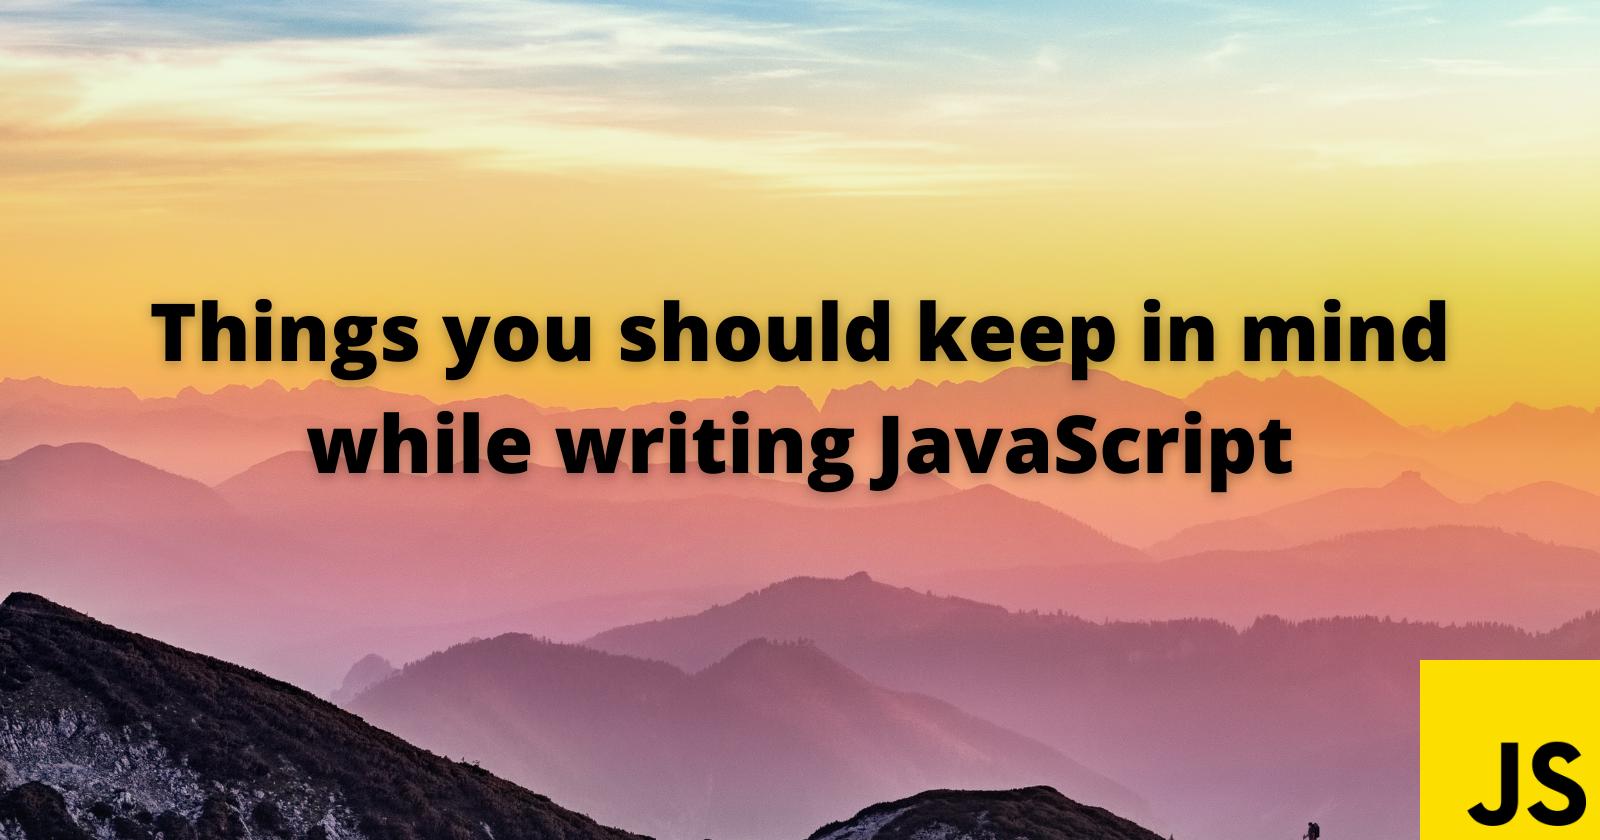 These things you should keep in mind while writing JavaScript